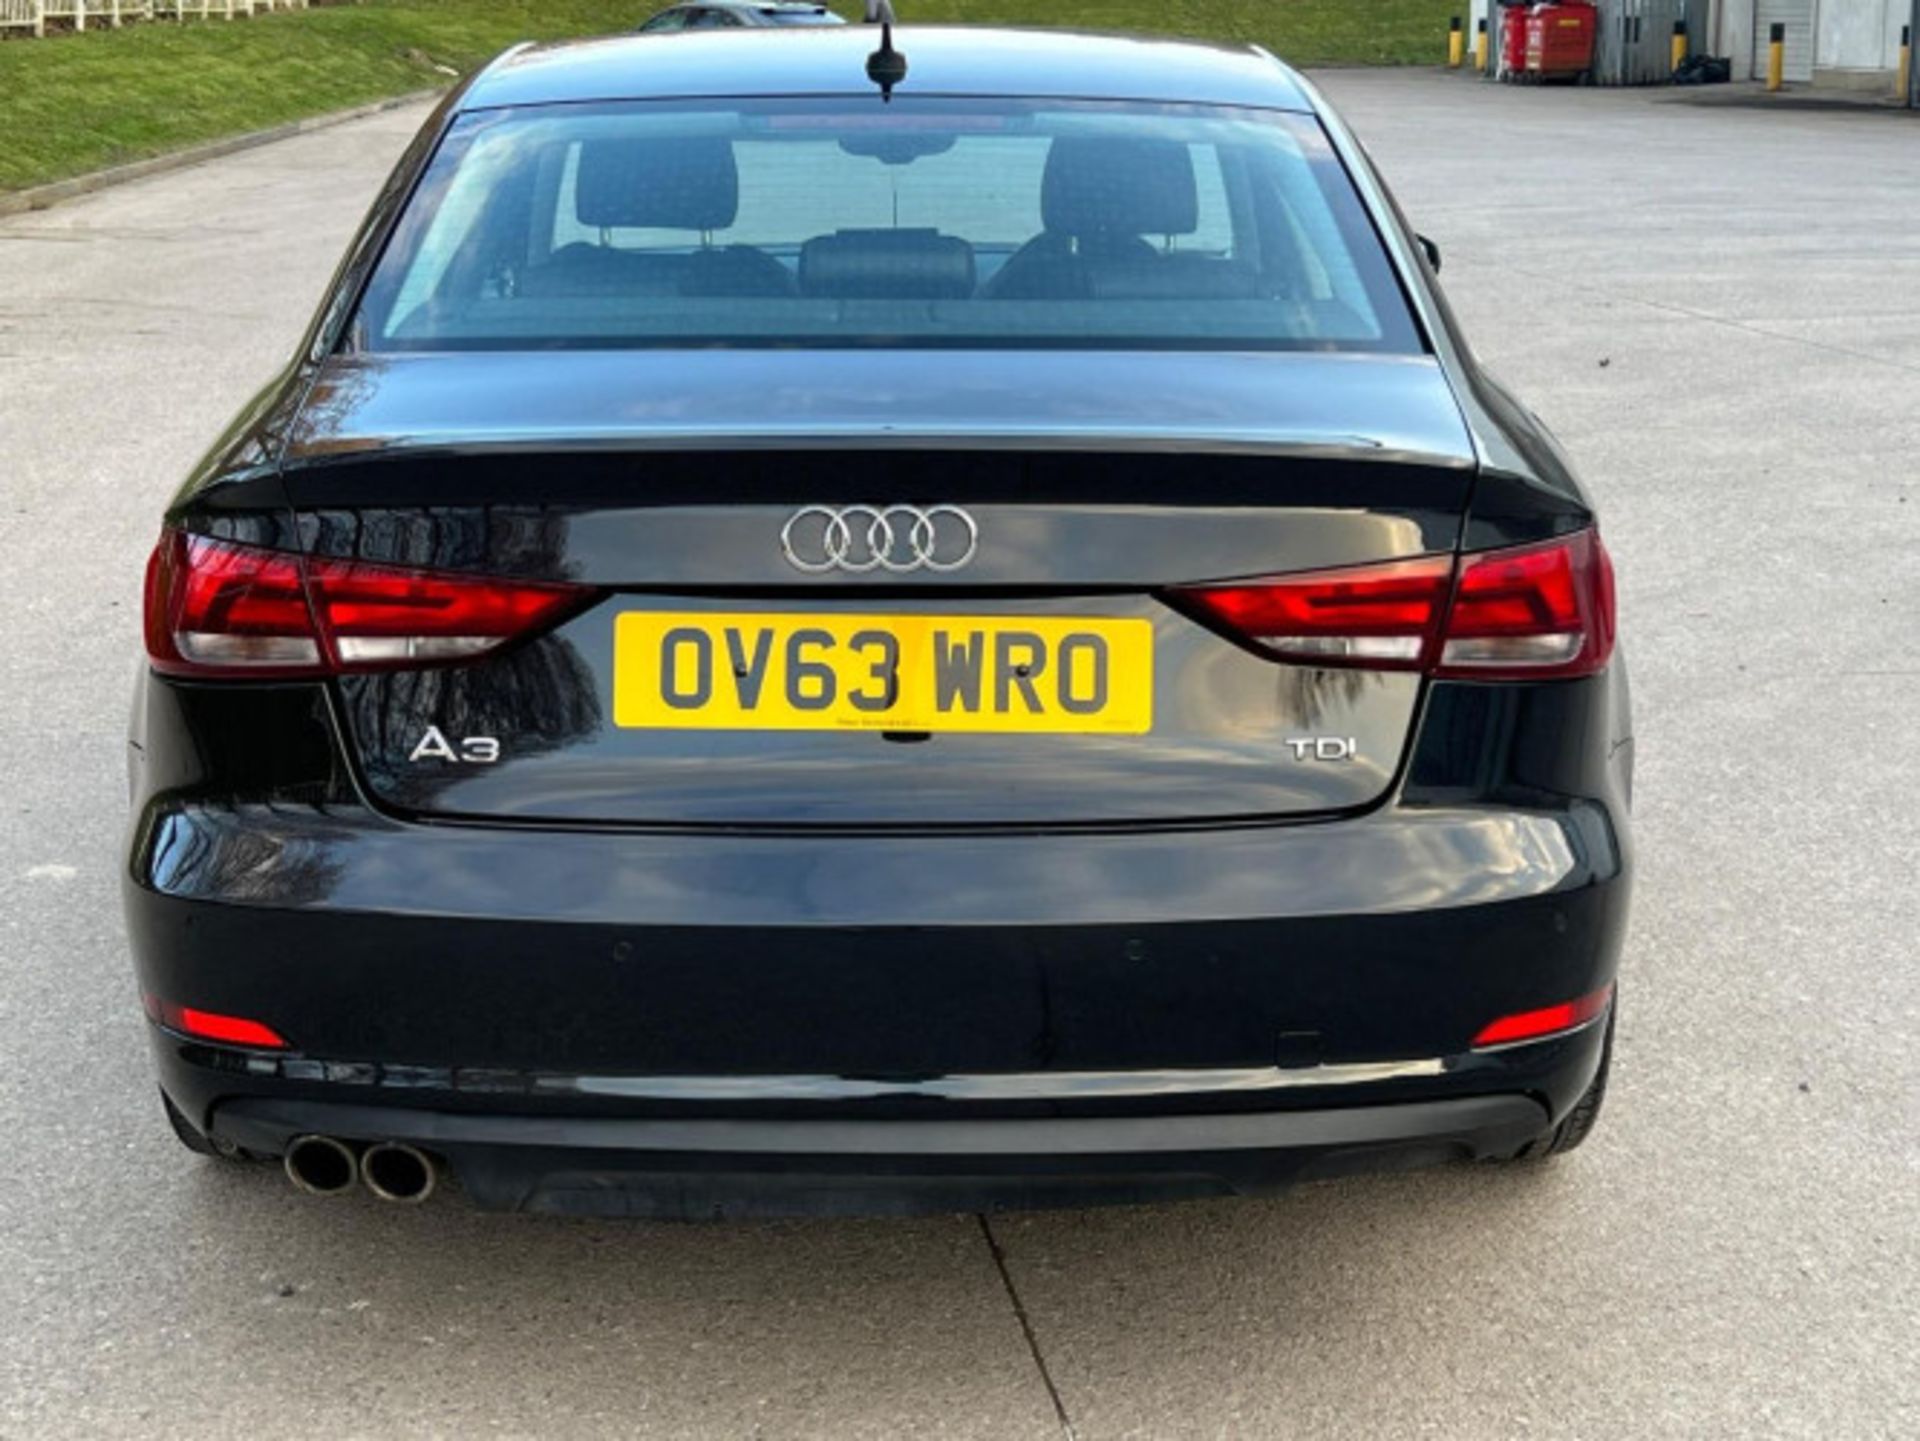 AUDI A3 2.0TDI SPORTBACK - STYLE, PERFORMANCE, AND COMFORT COMBINED >>--NO VAT ON HAMMER--<< - Image 204 of 216